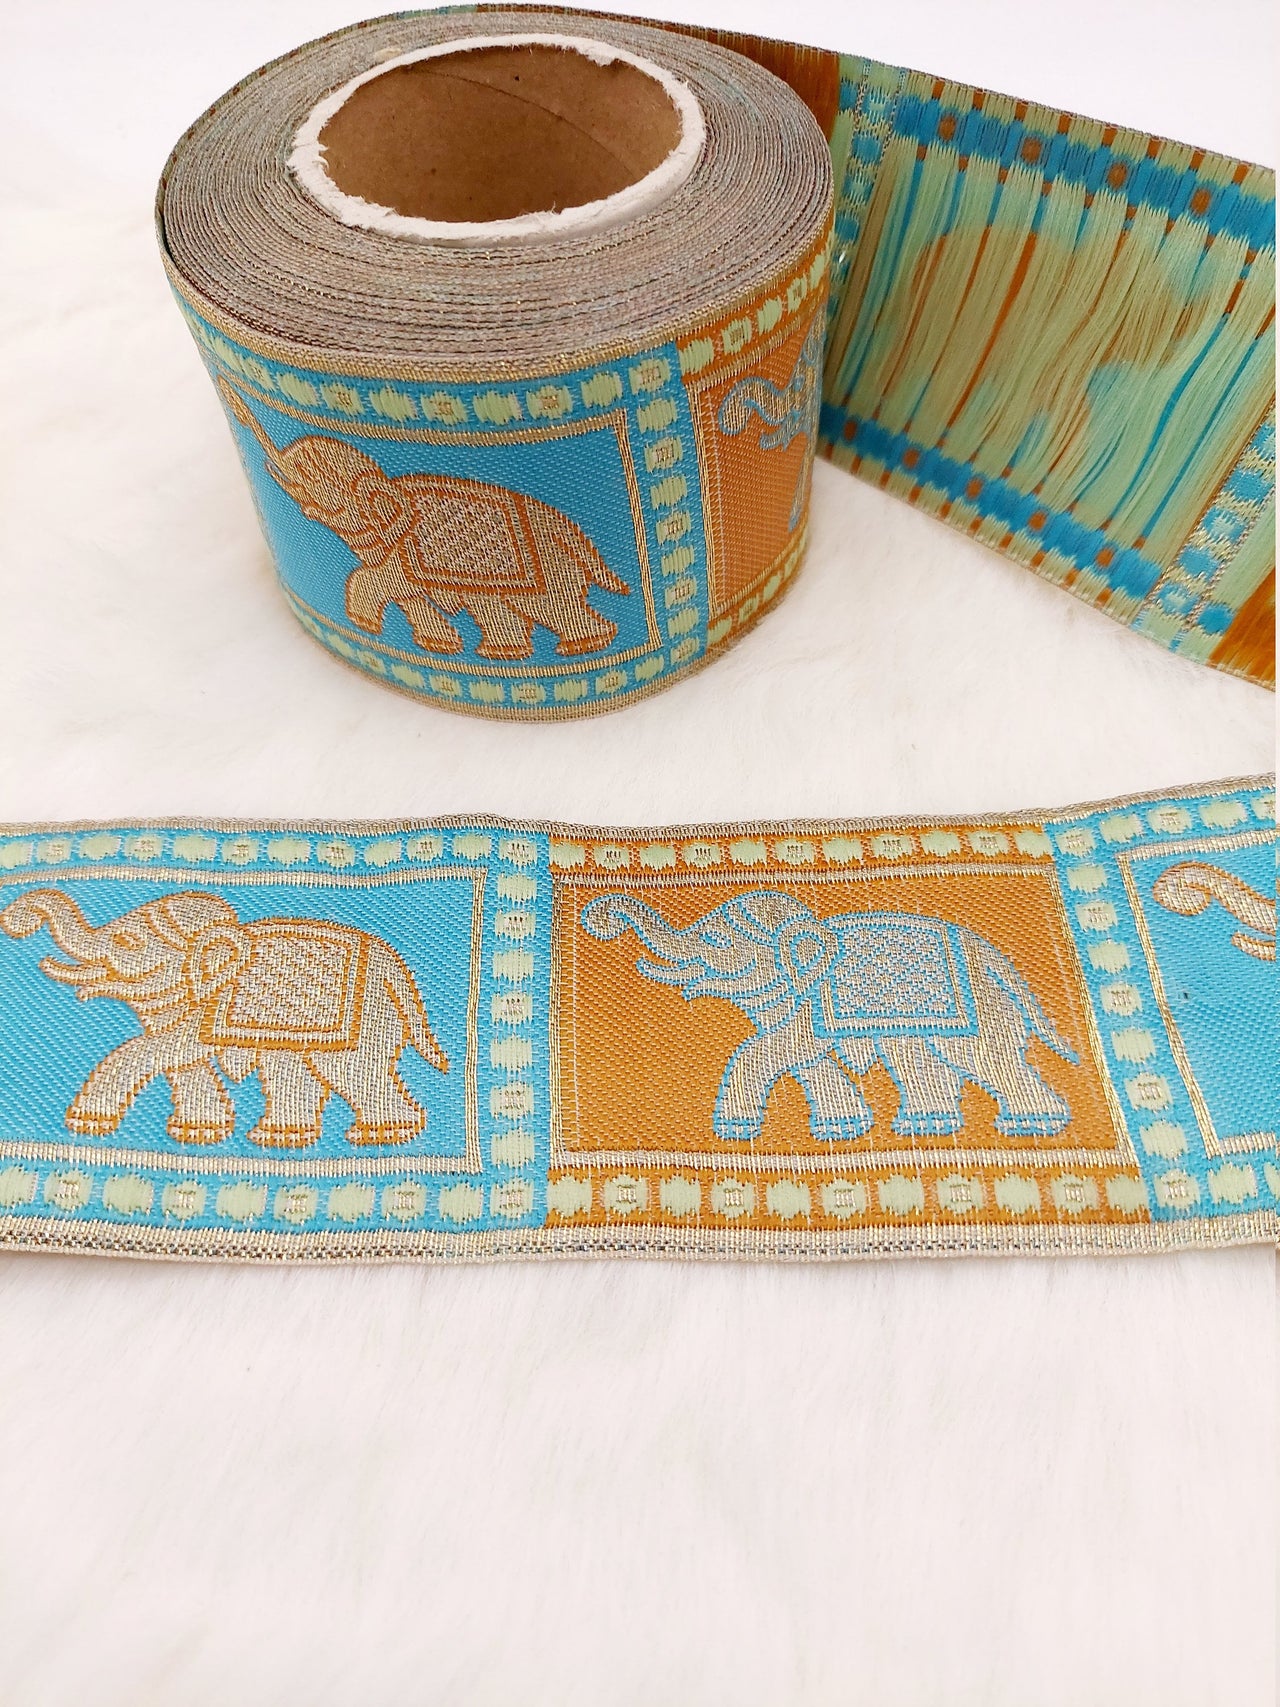 Beige Shimmer Jacquard Brocade Saree Border Trim with Elephant Woven in Brown and Blue, 9 Yards